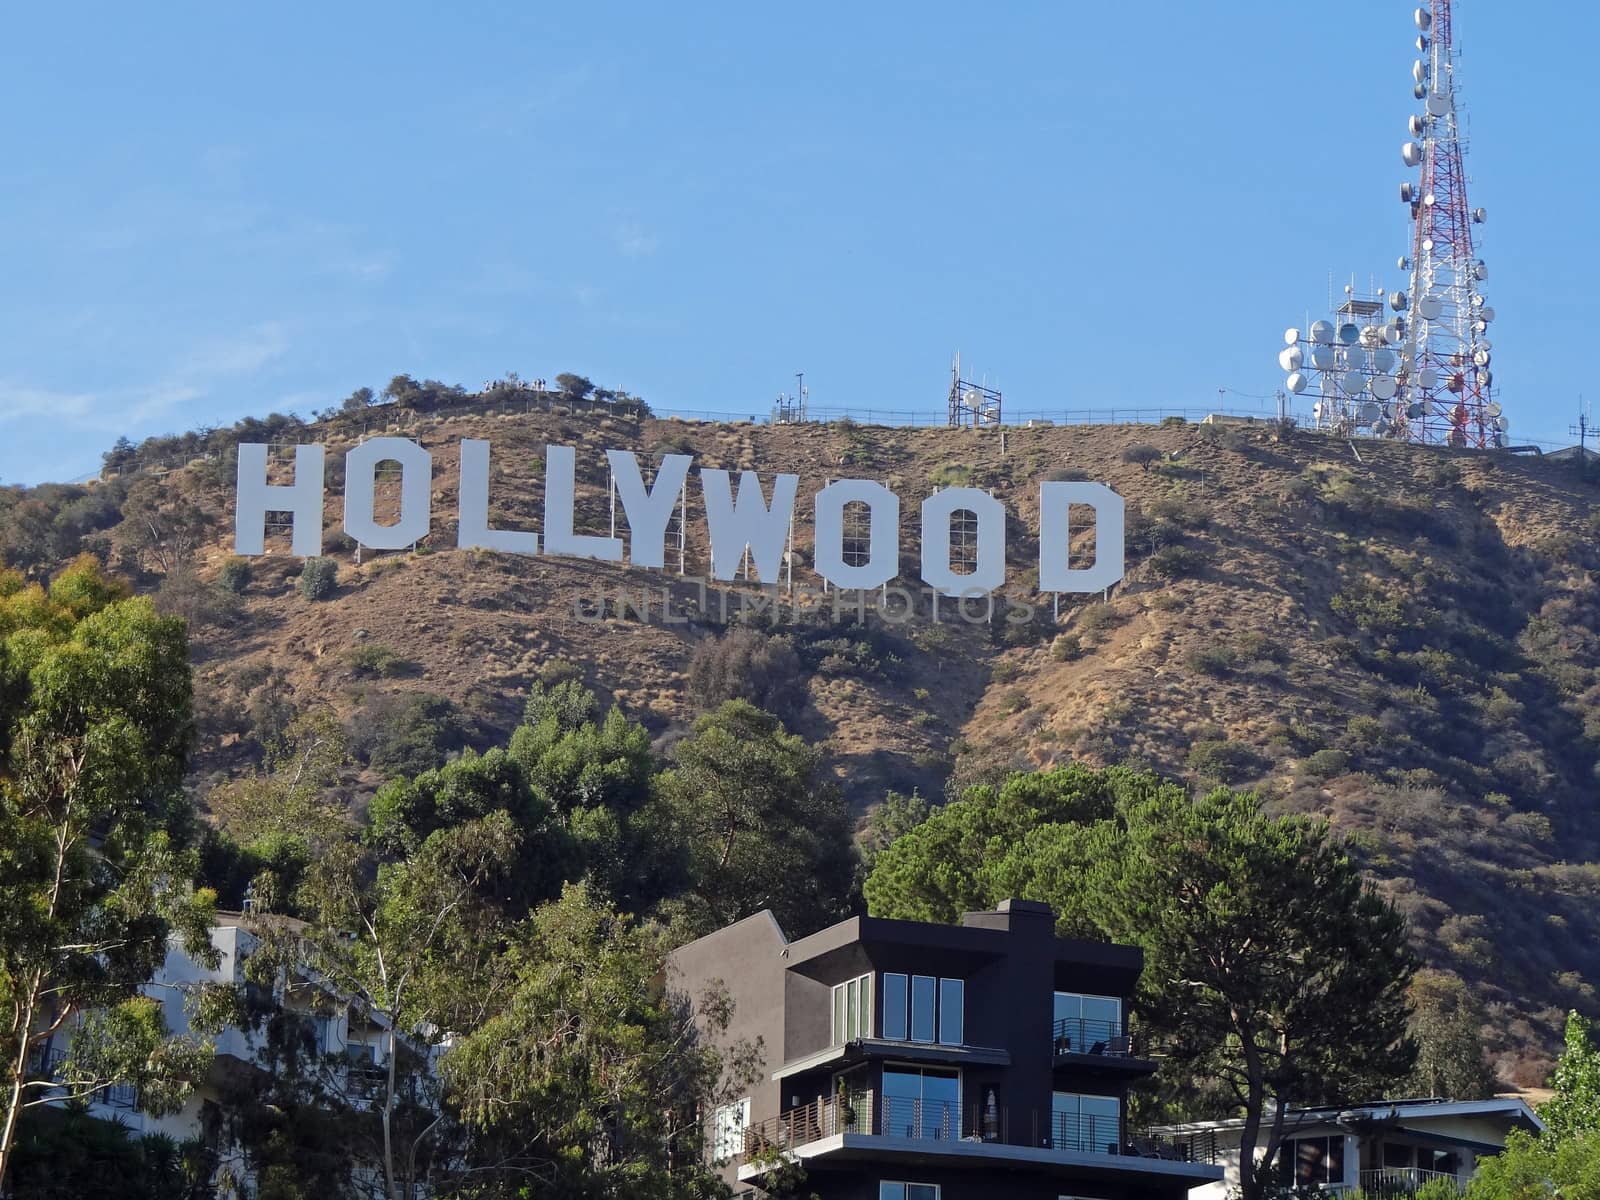 the world famous landmark hollywood sign in Los angeles